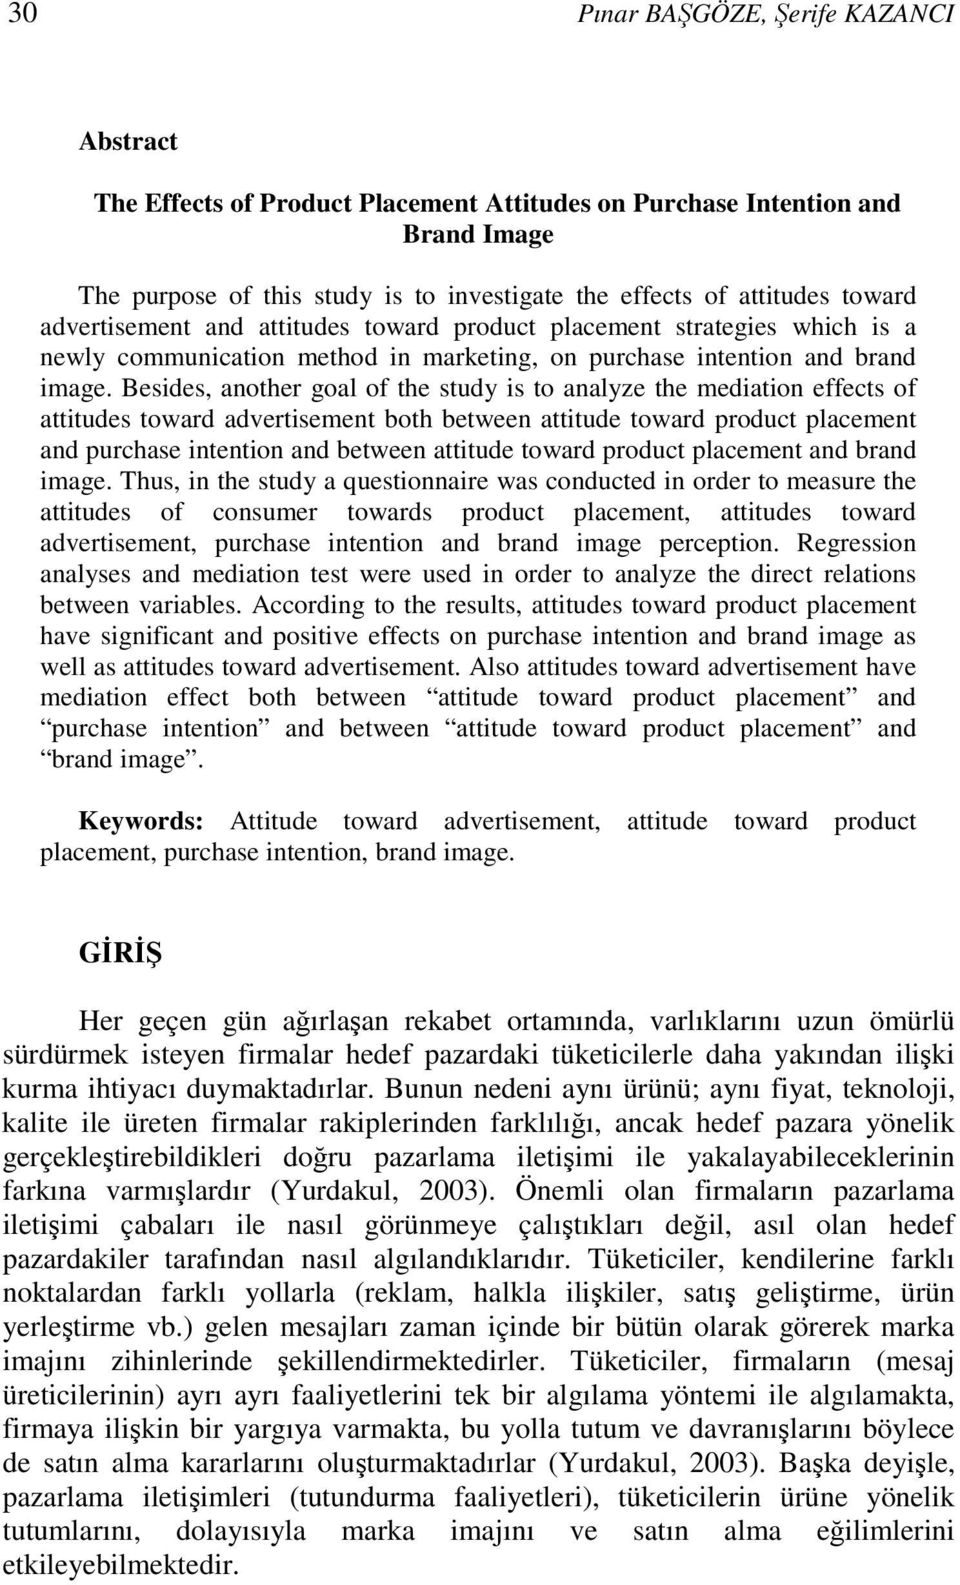 Besides, another goal of the study is to analyze the mediation effects of attitudes toward advertisement both between attitude toward product placement and purchase intention and between attitude